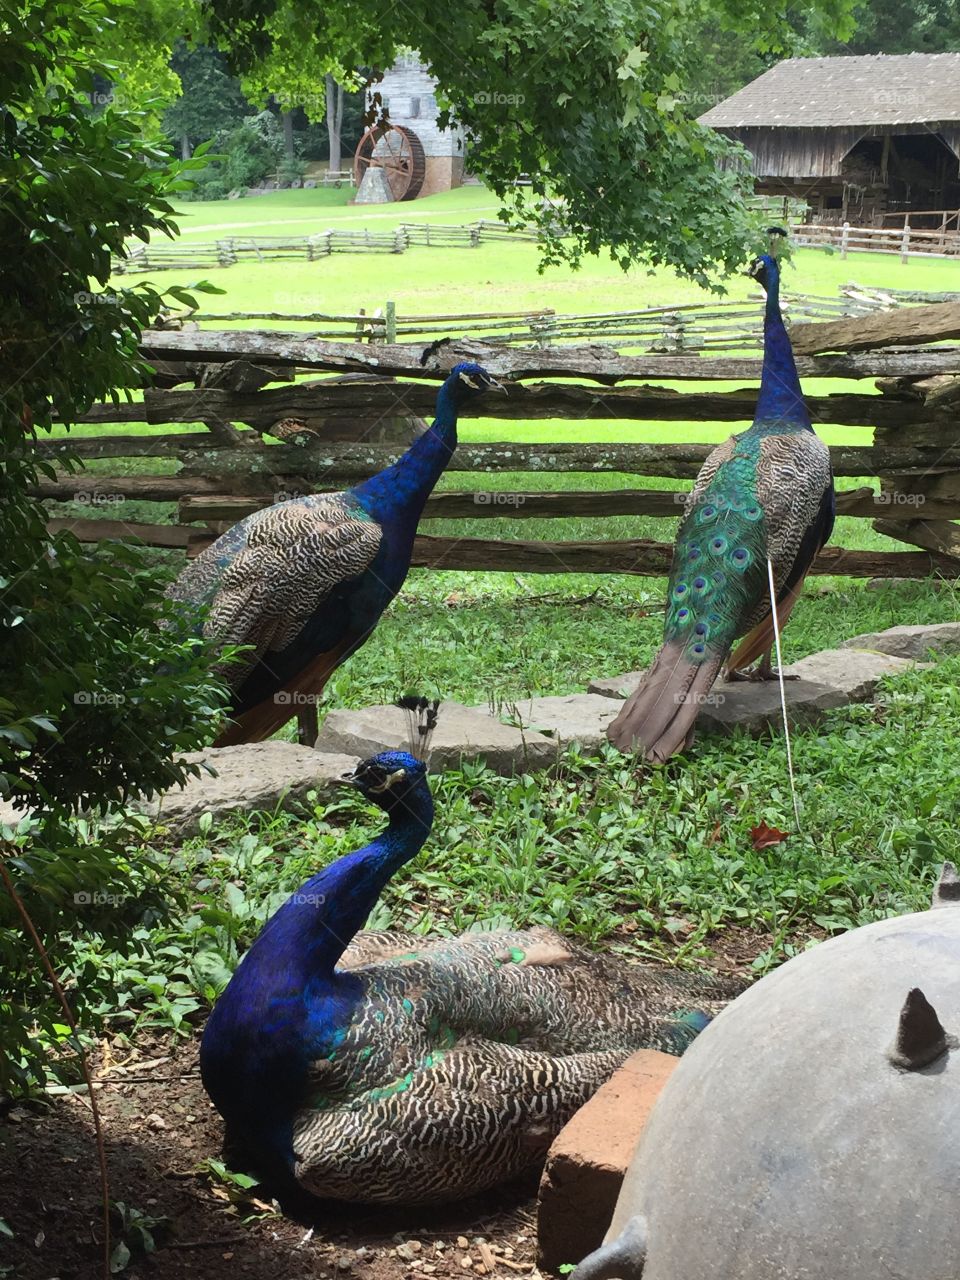 The adult male peacocks . Appalachia museum, Clinton,Tennessee 